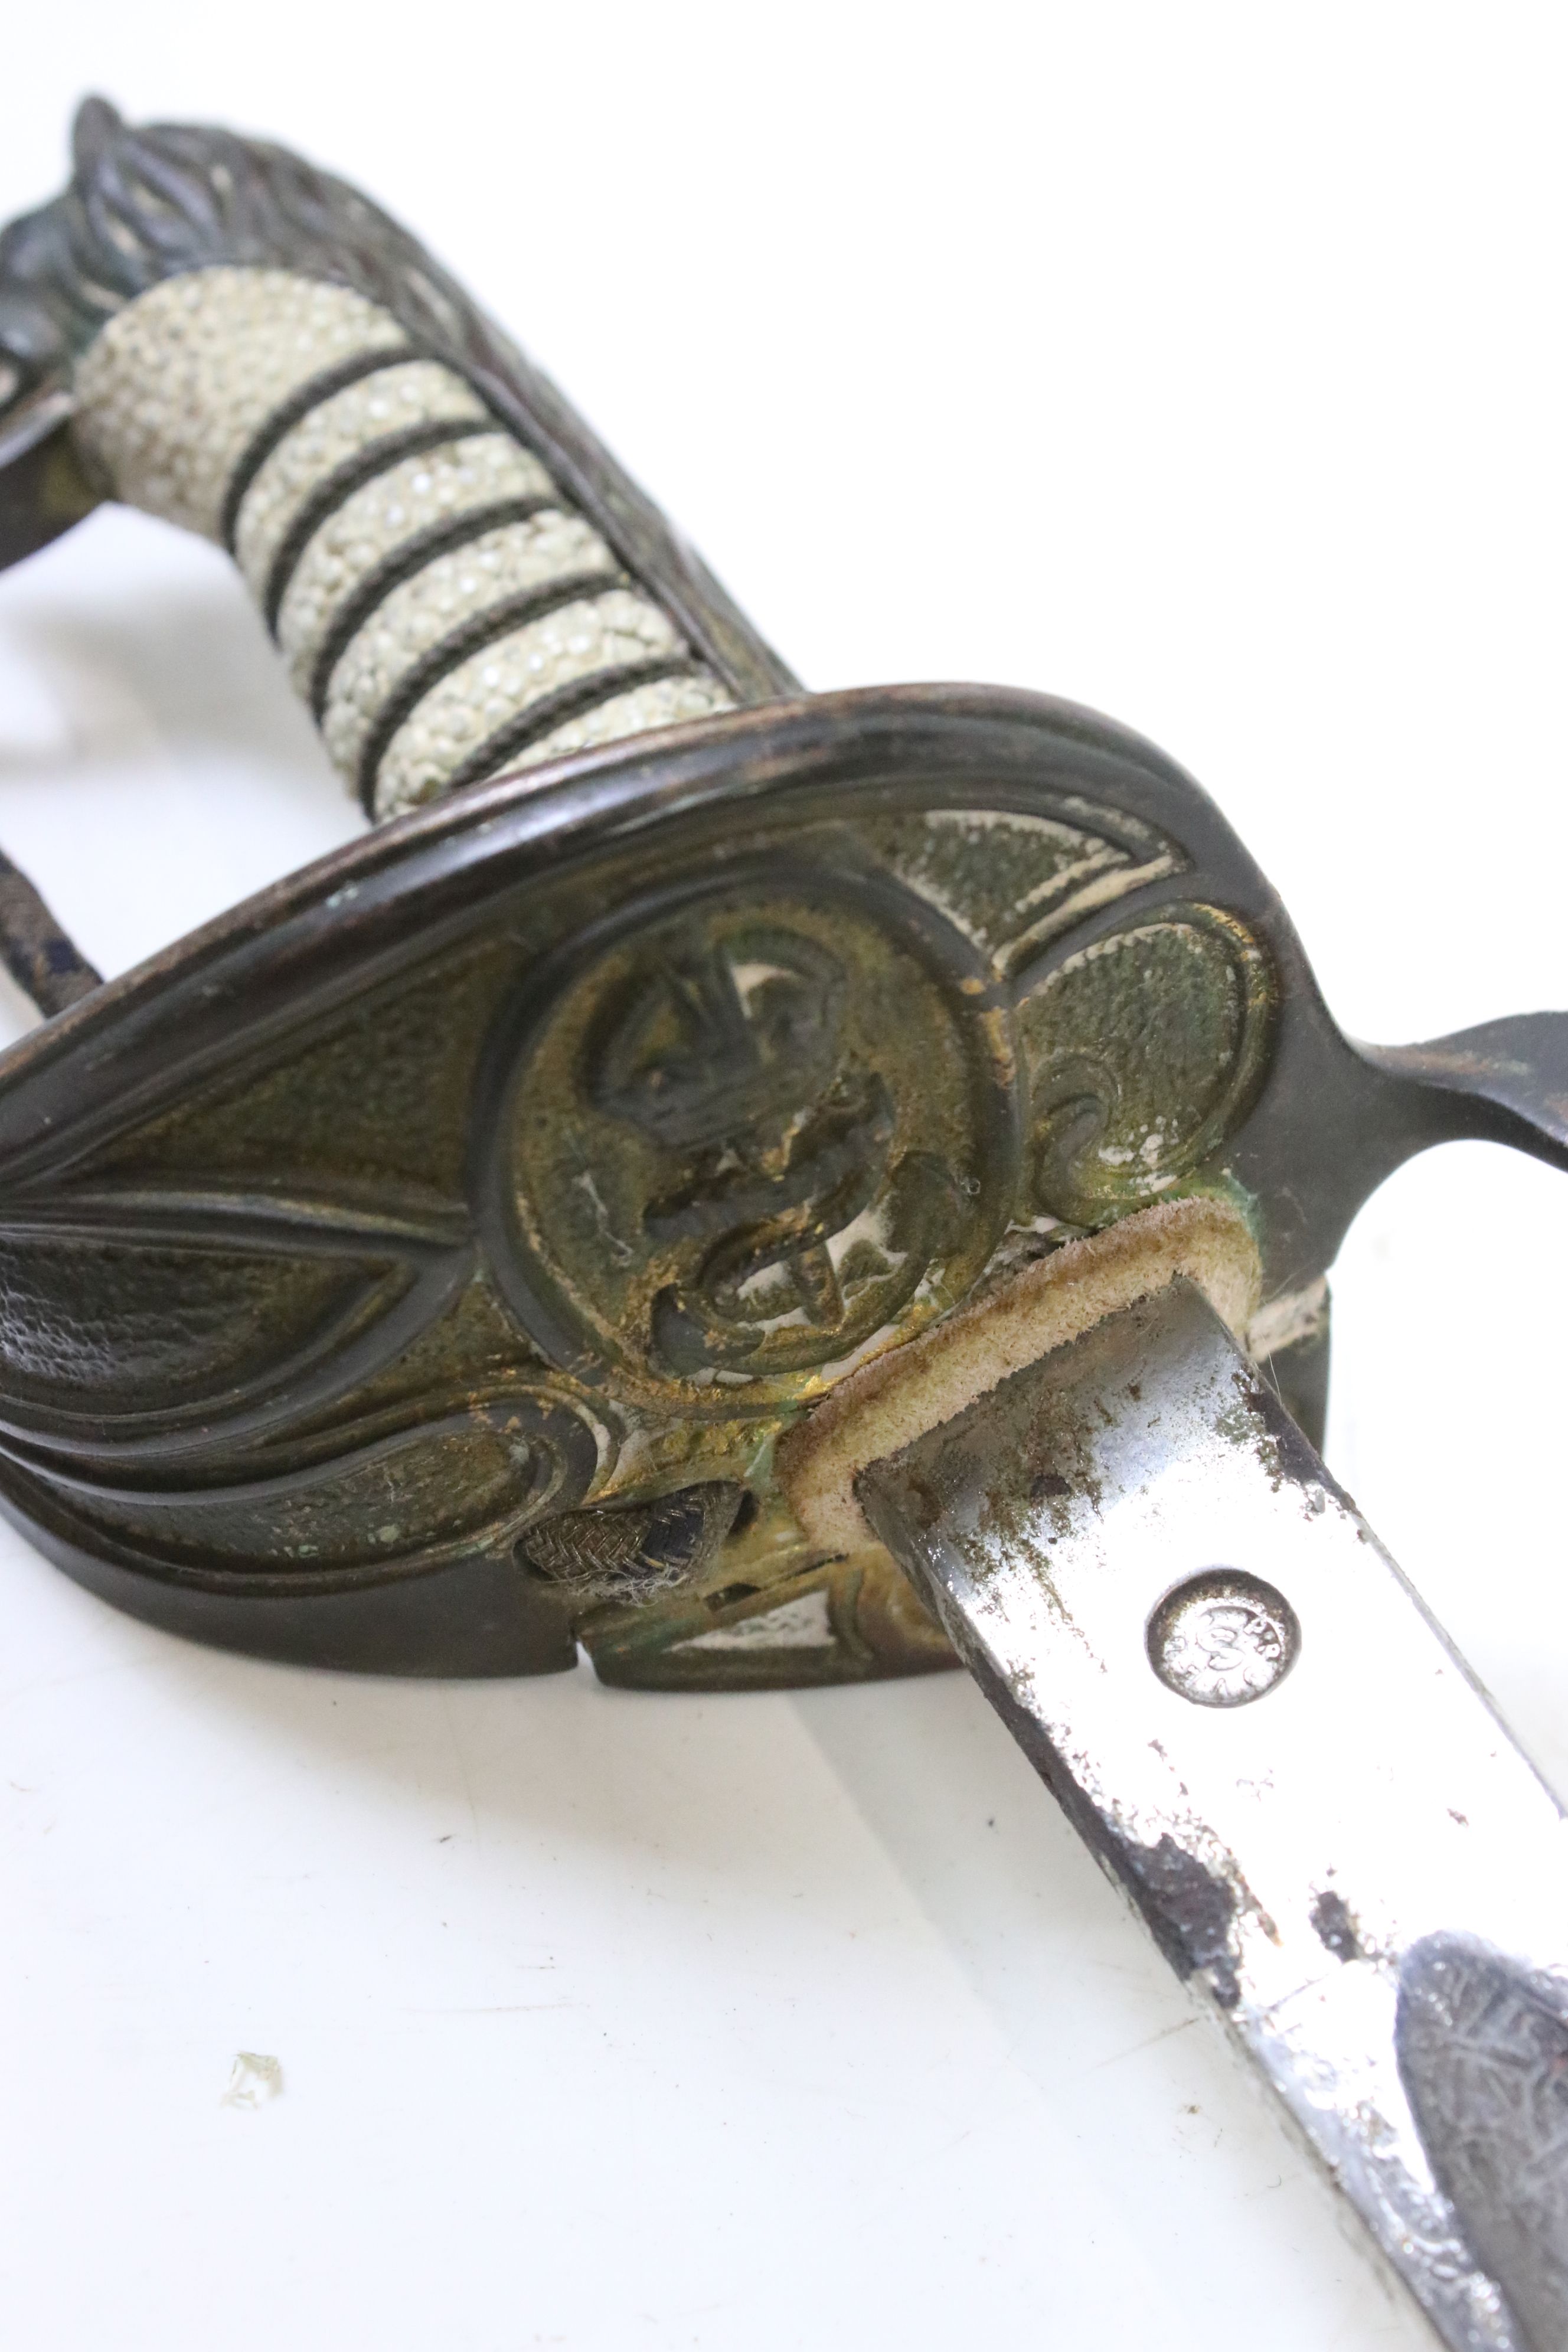 A Royal Navy officer's dress sword, lion head pommel, navy cypher with the kings crown, shagreen - Image 5 of 7